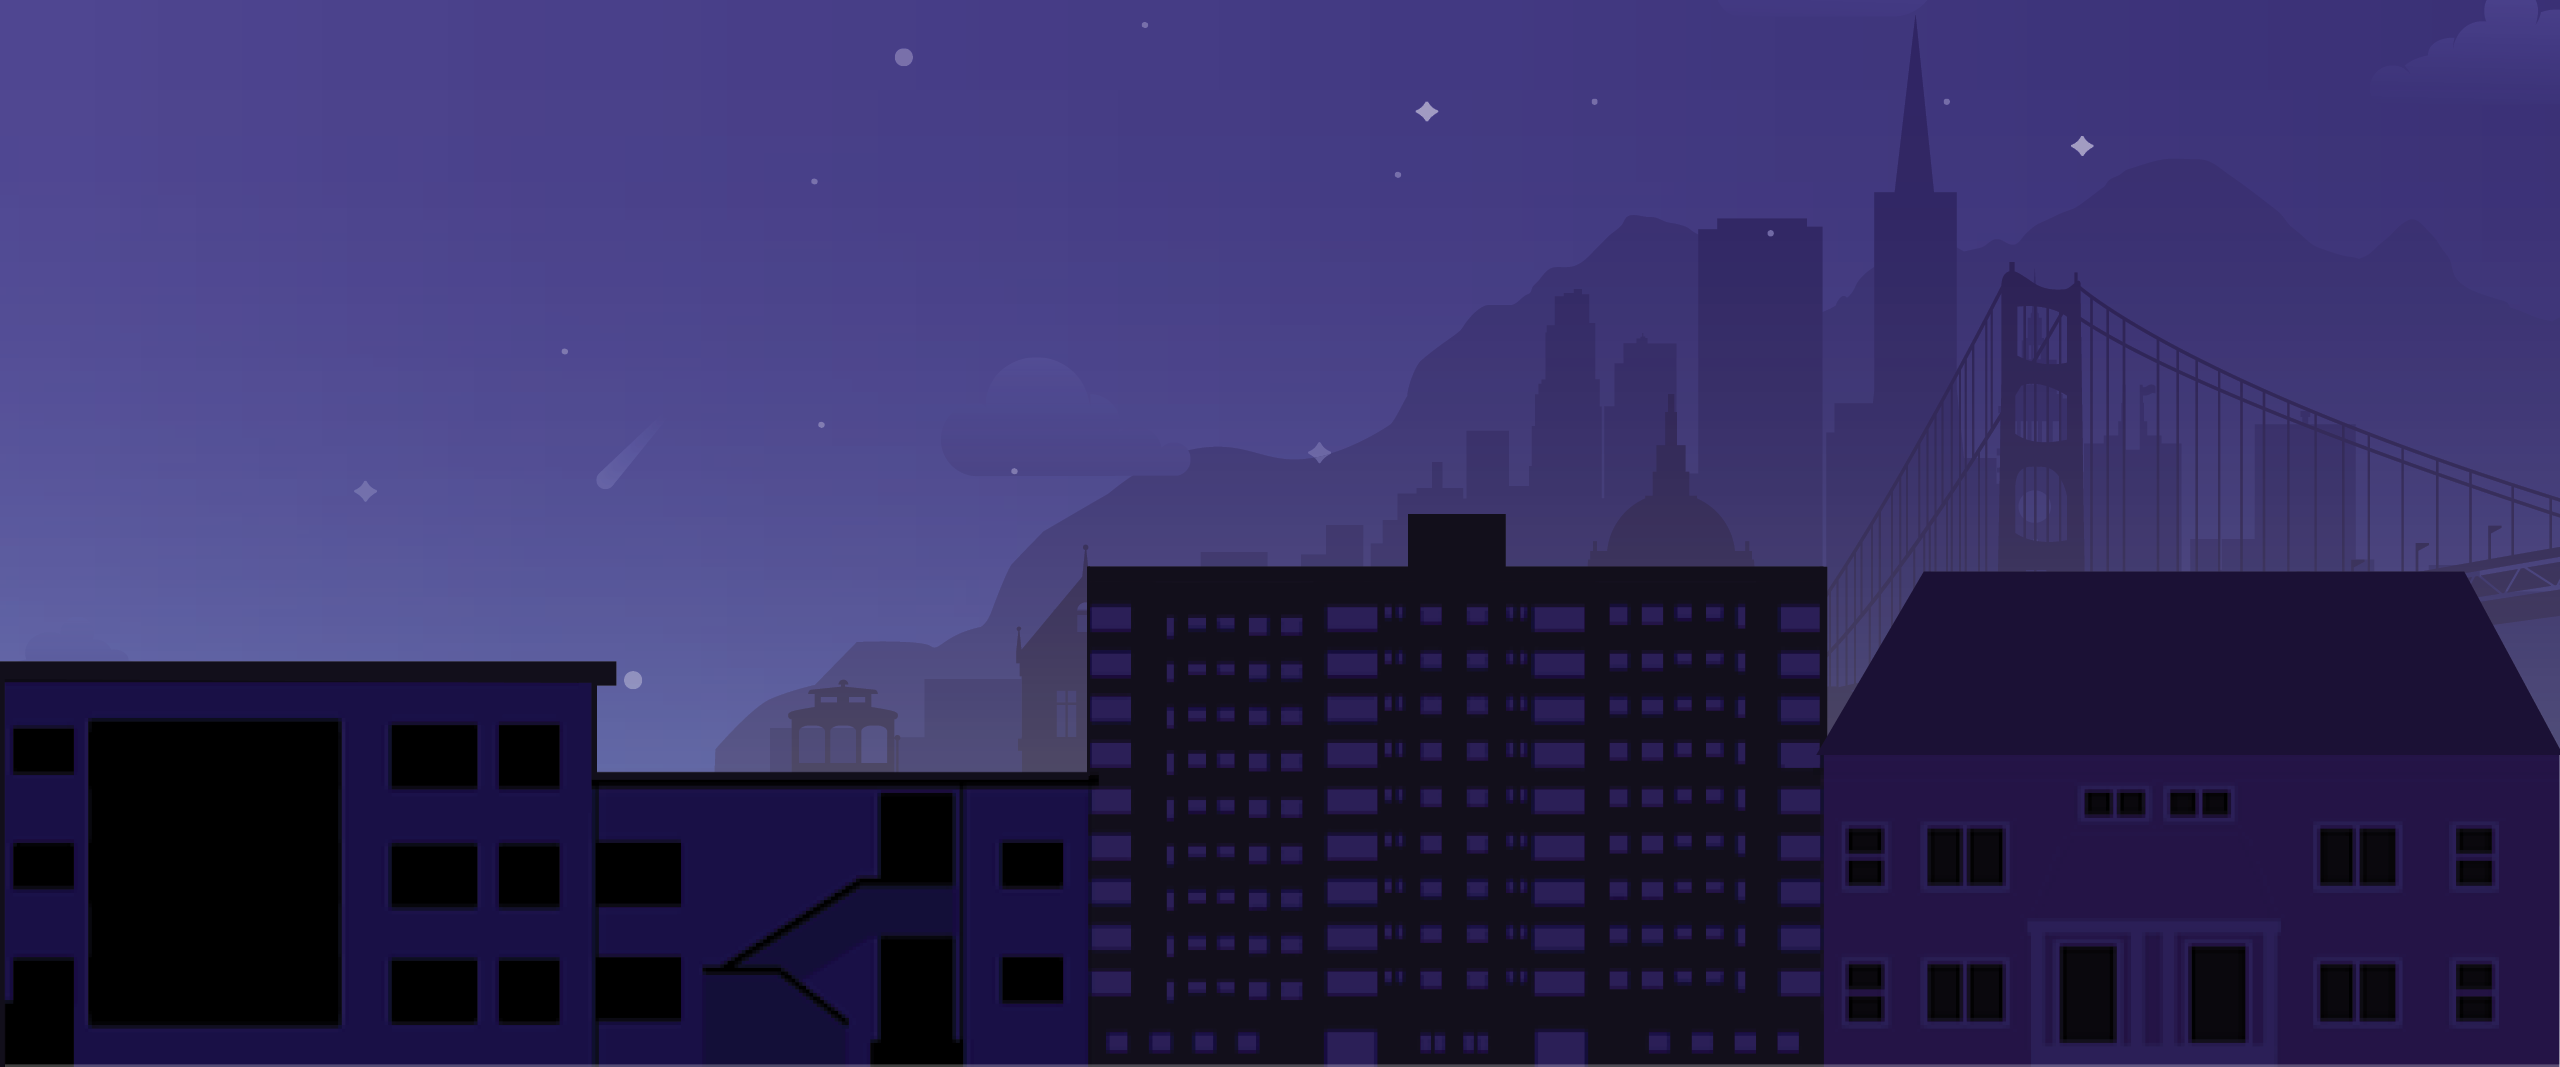 UPN & UPS illustration with SF skyline silhouette